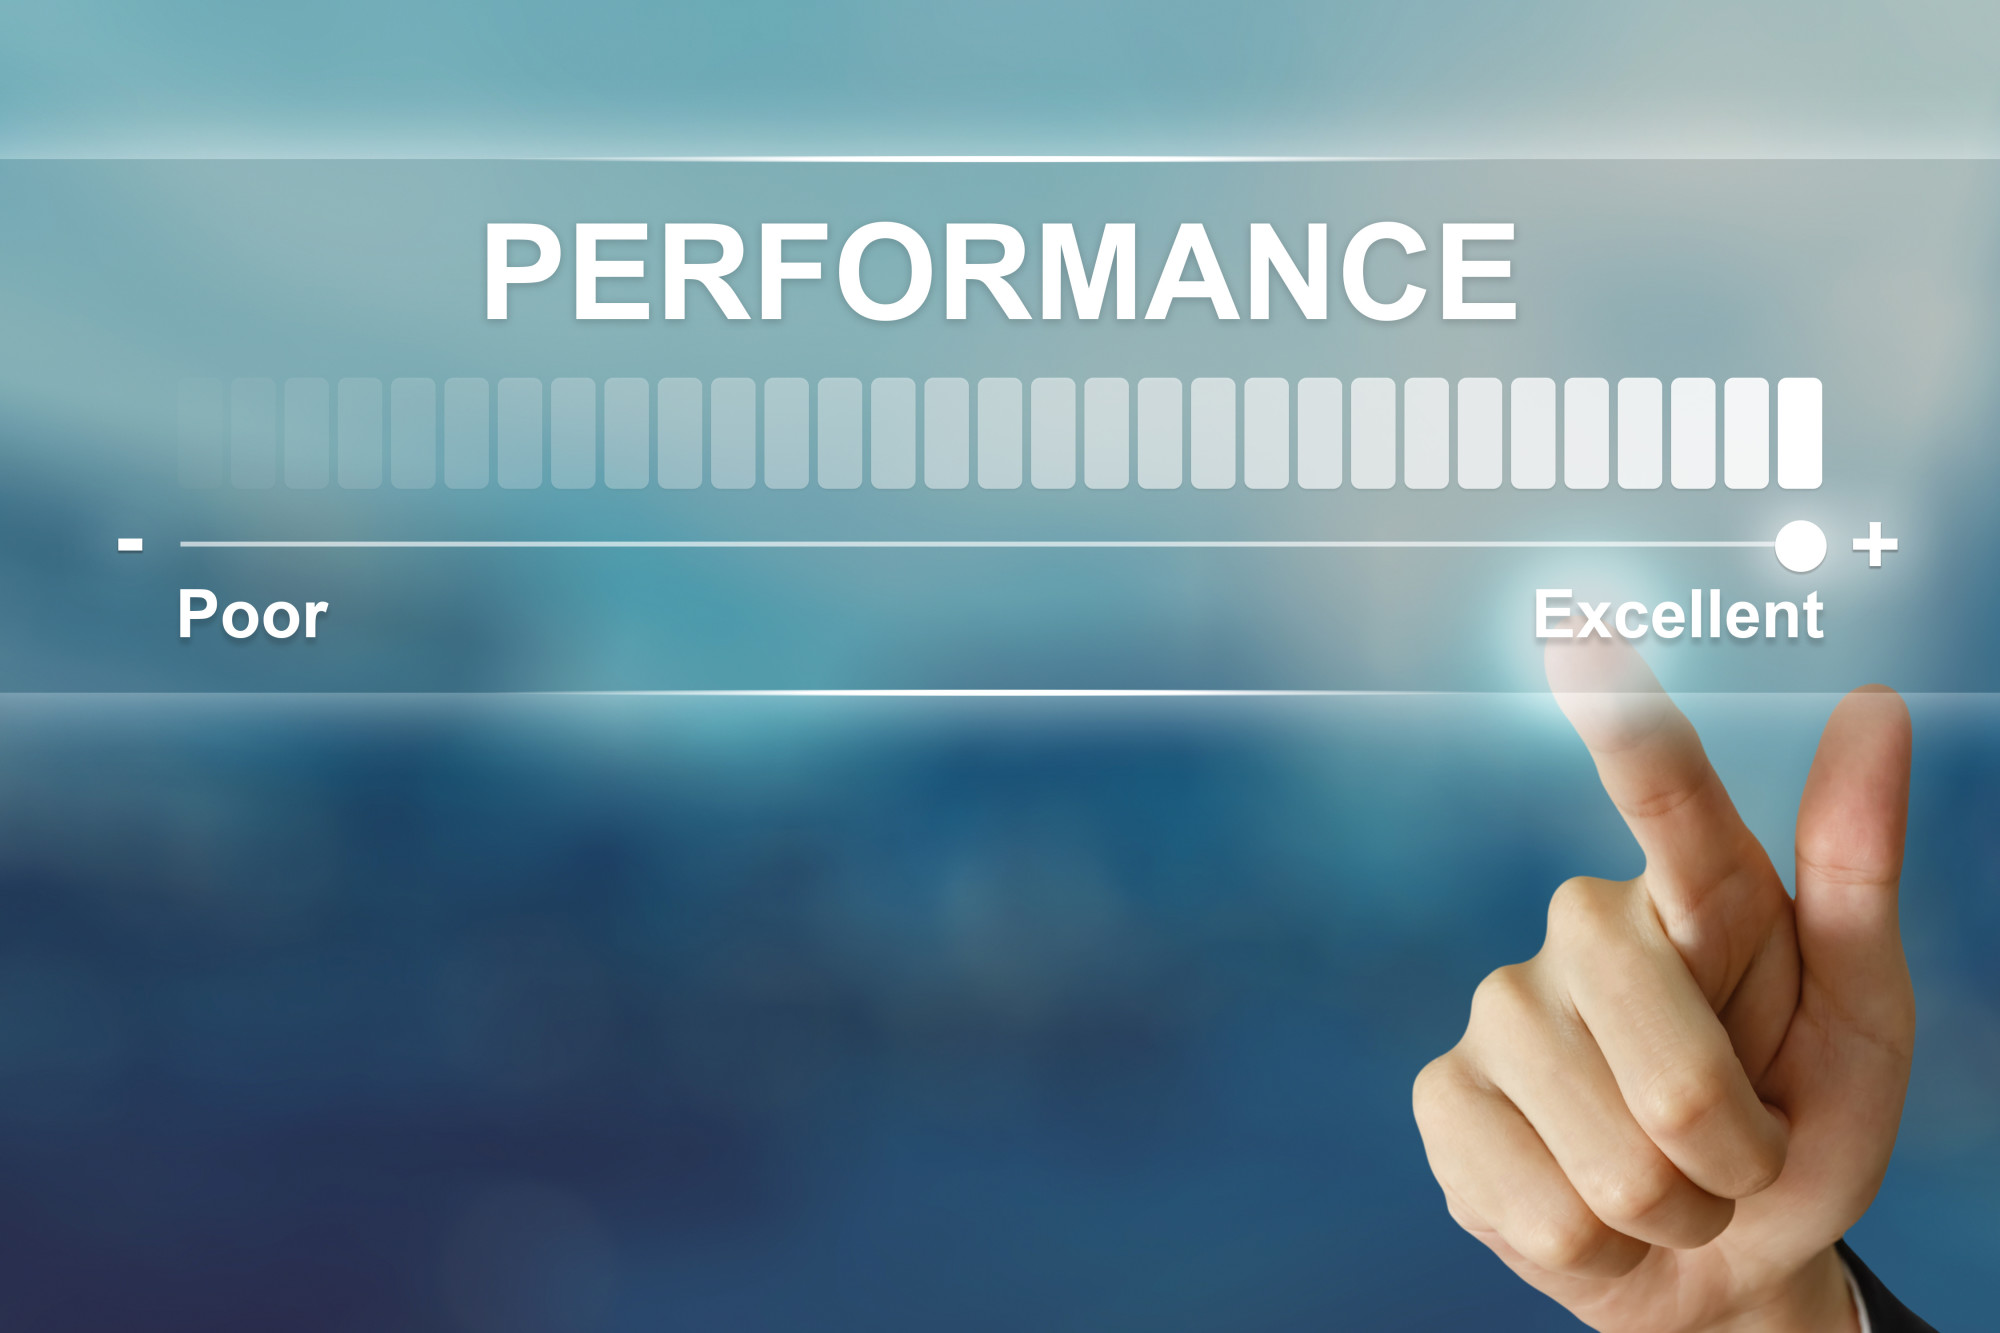 What Are the Benefits of Managing Performance?